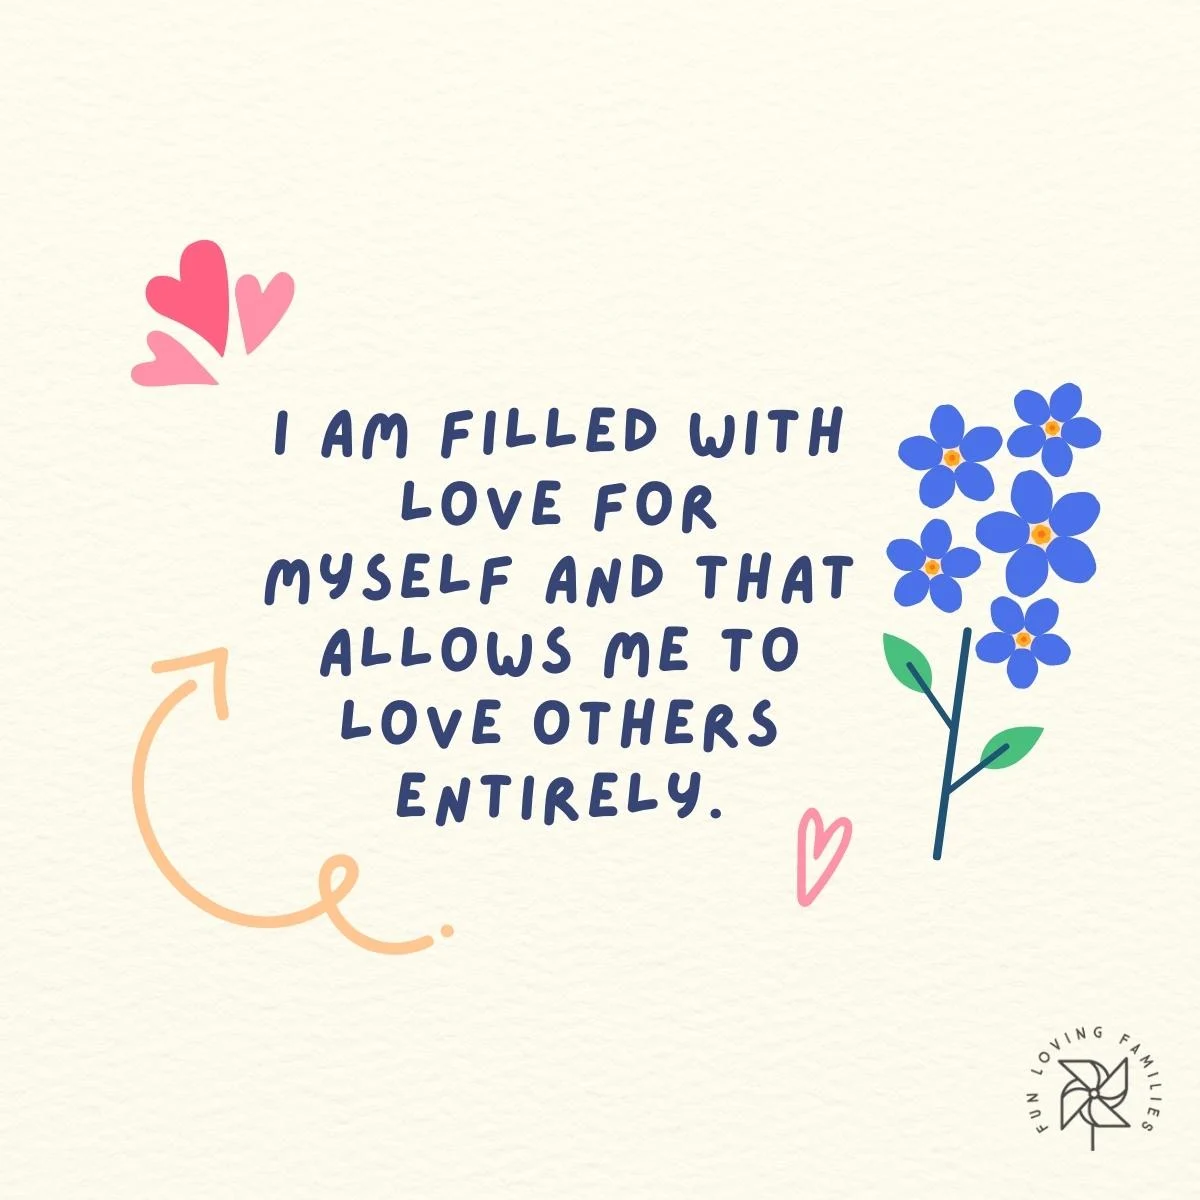 I am filled with love for myself and that allows me to love others entirely affirmation